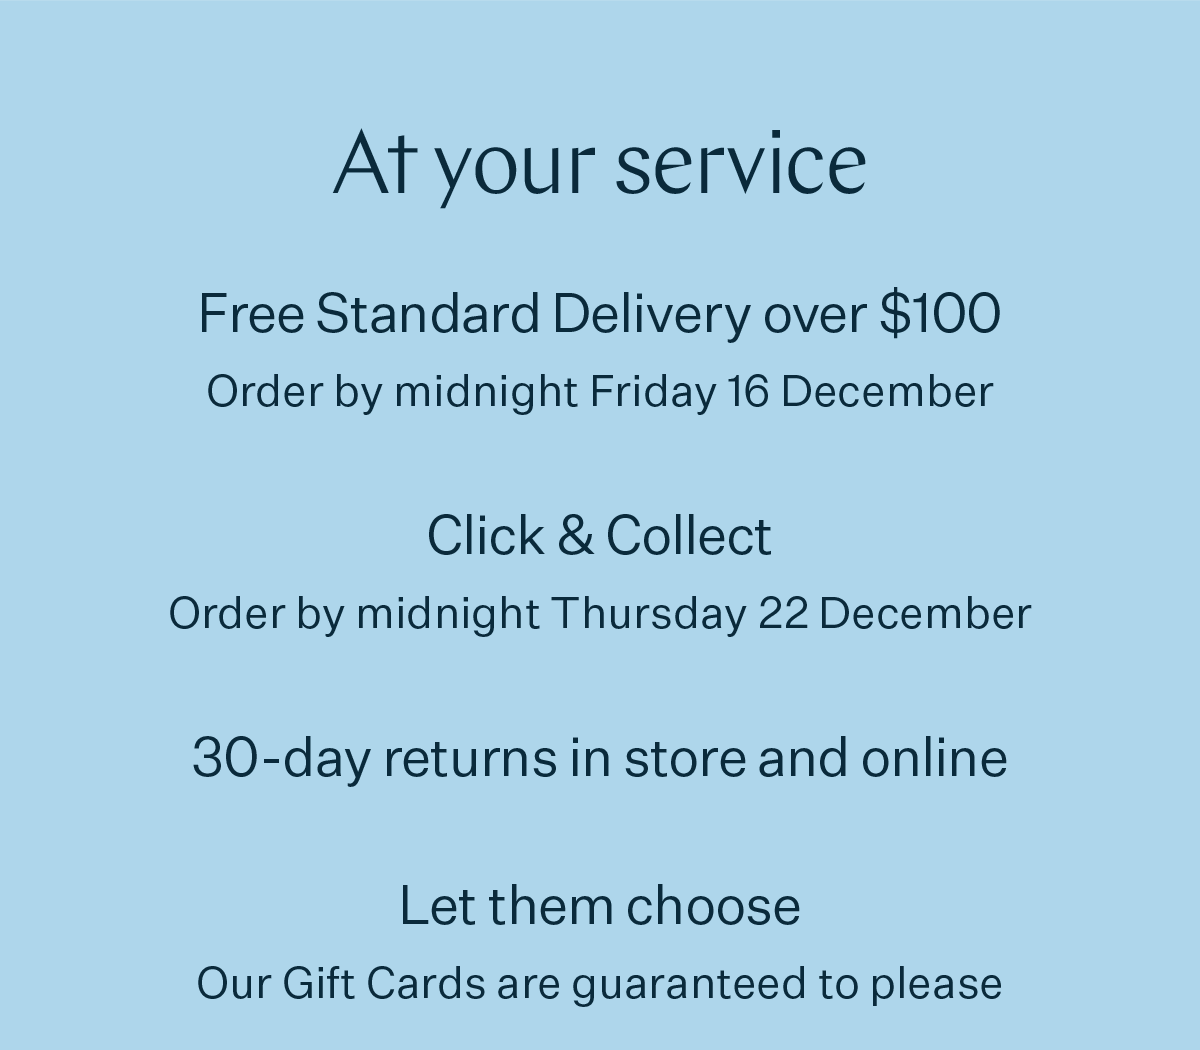 At your service Free Standard Delivery over $100 Order by midnight Friday 16 December Click & Collect Order by midnight Thursday 22 December 30 day returns in store and online Let them choose Our Gift Cards are guaranteed to please